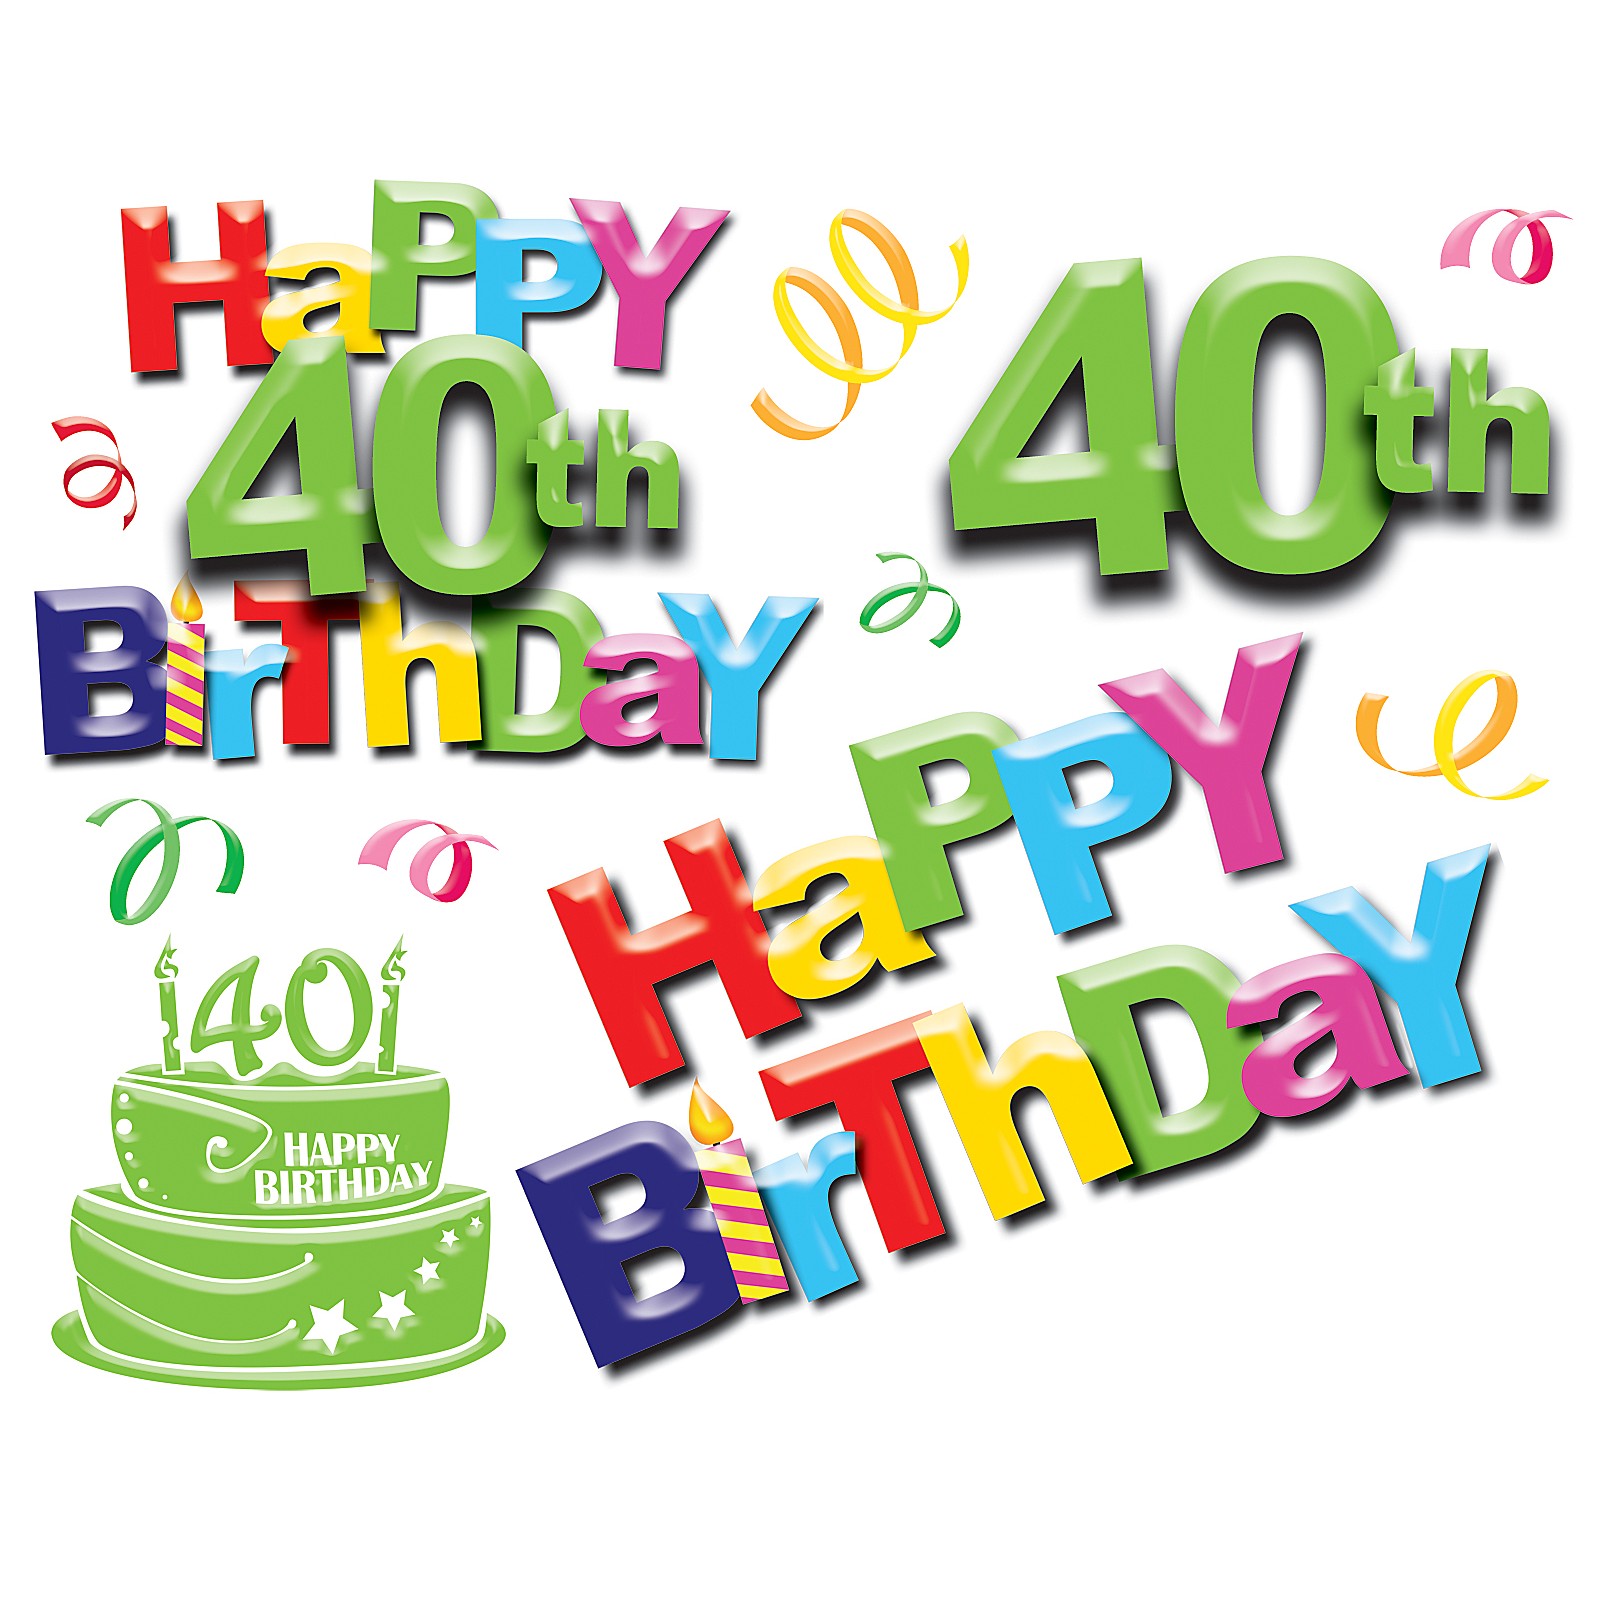 Happy 40th Birthday Pictures ClipArt Best